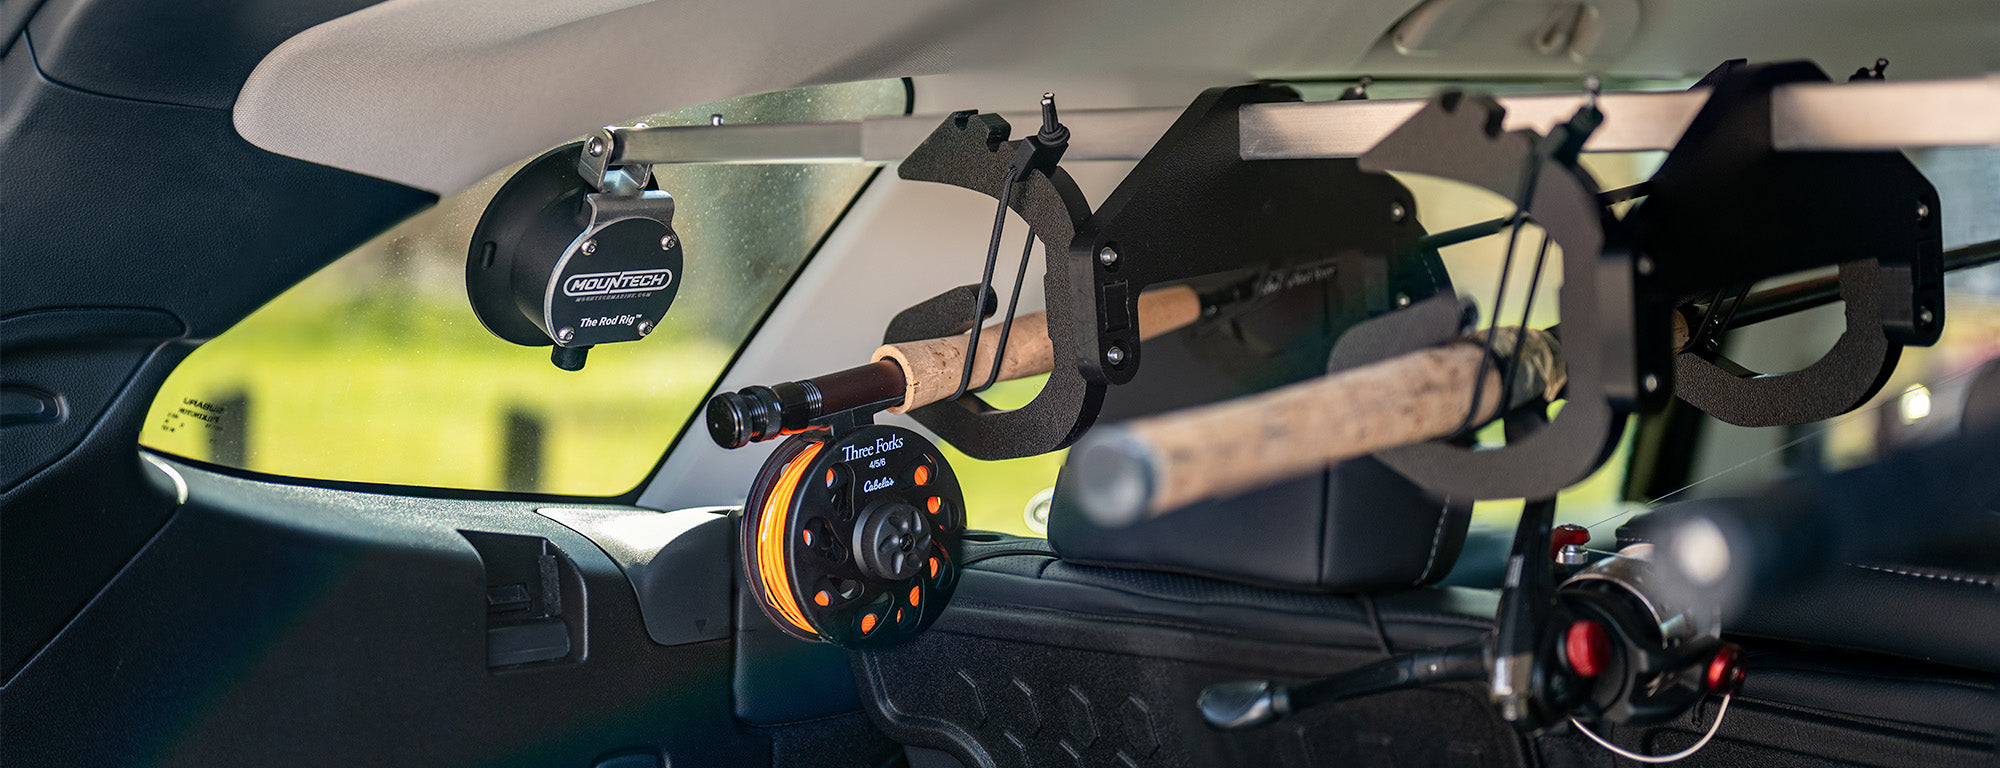 Fishing pole holder that uses car window to transport fishing poles